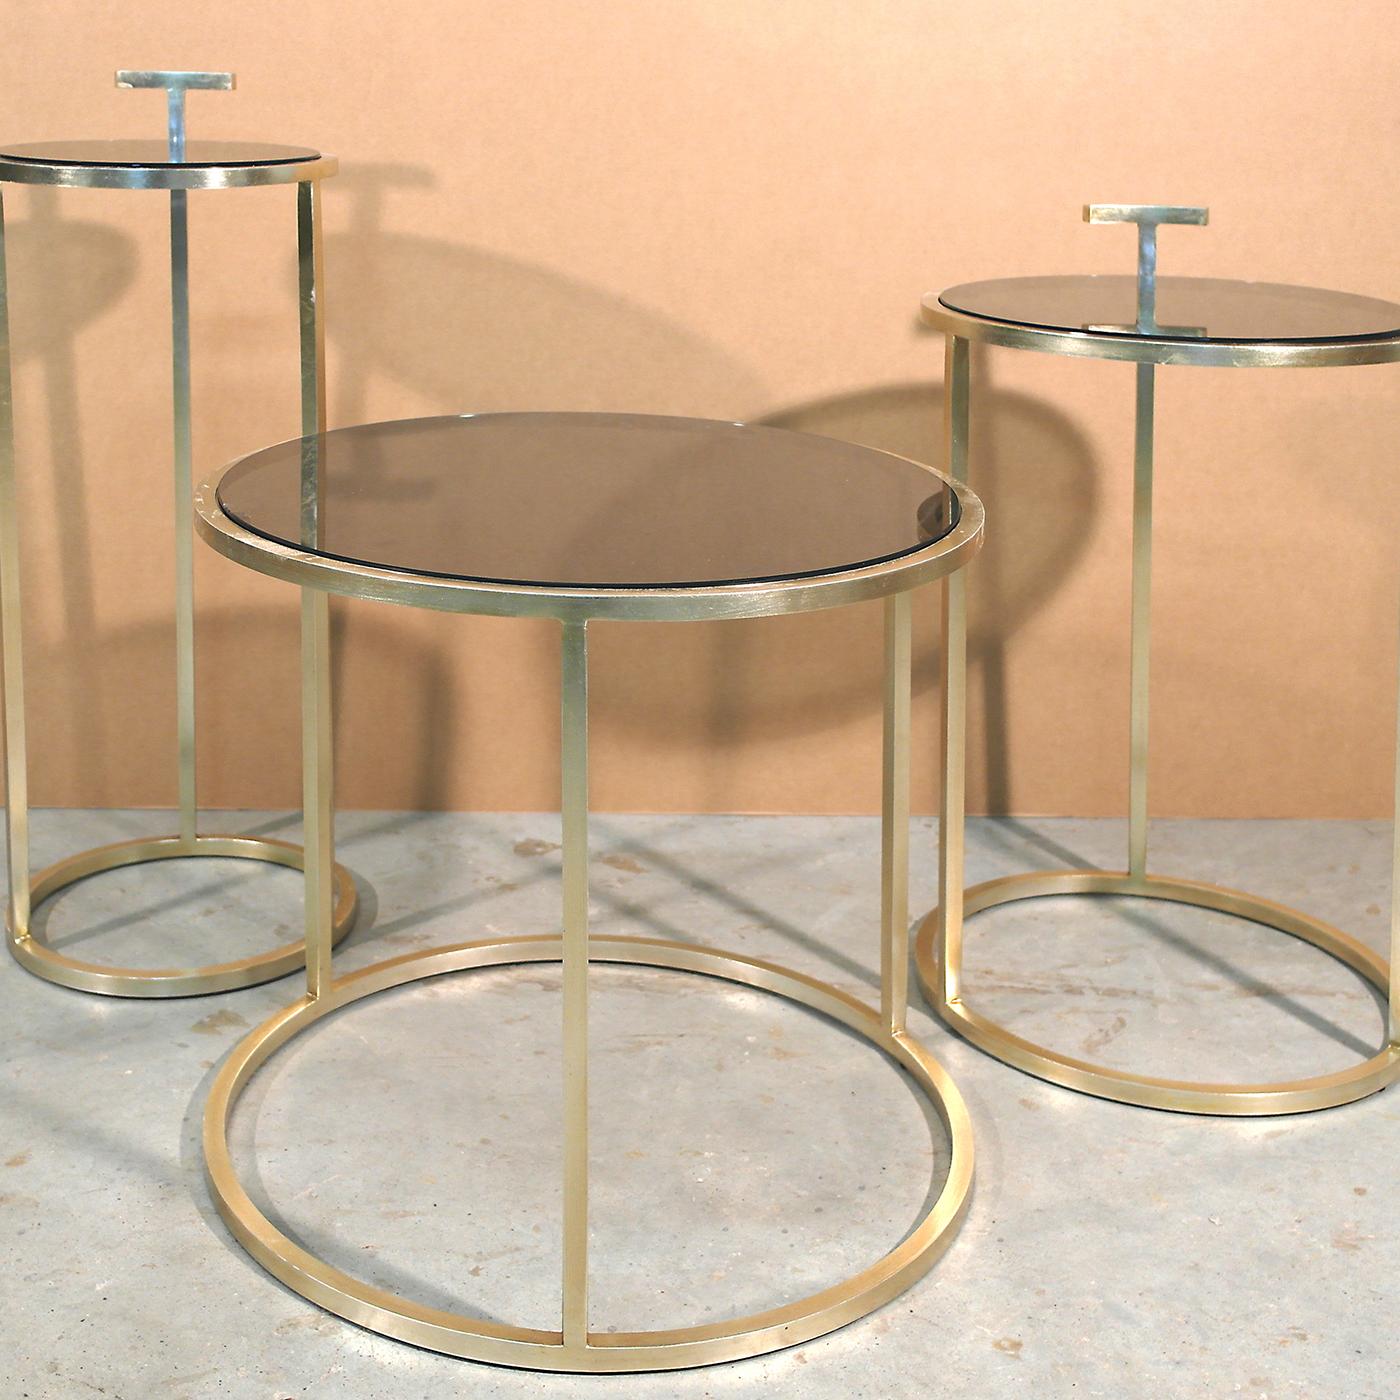 This round side table makes a sleek addition to the living room, boasting a circular brass base with a light brushed bronze finish. Characterized by pure lines and a geometric shapes, the design is finished with a bronze glass top. Exuding a modern